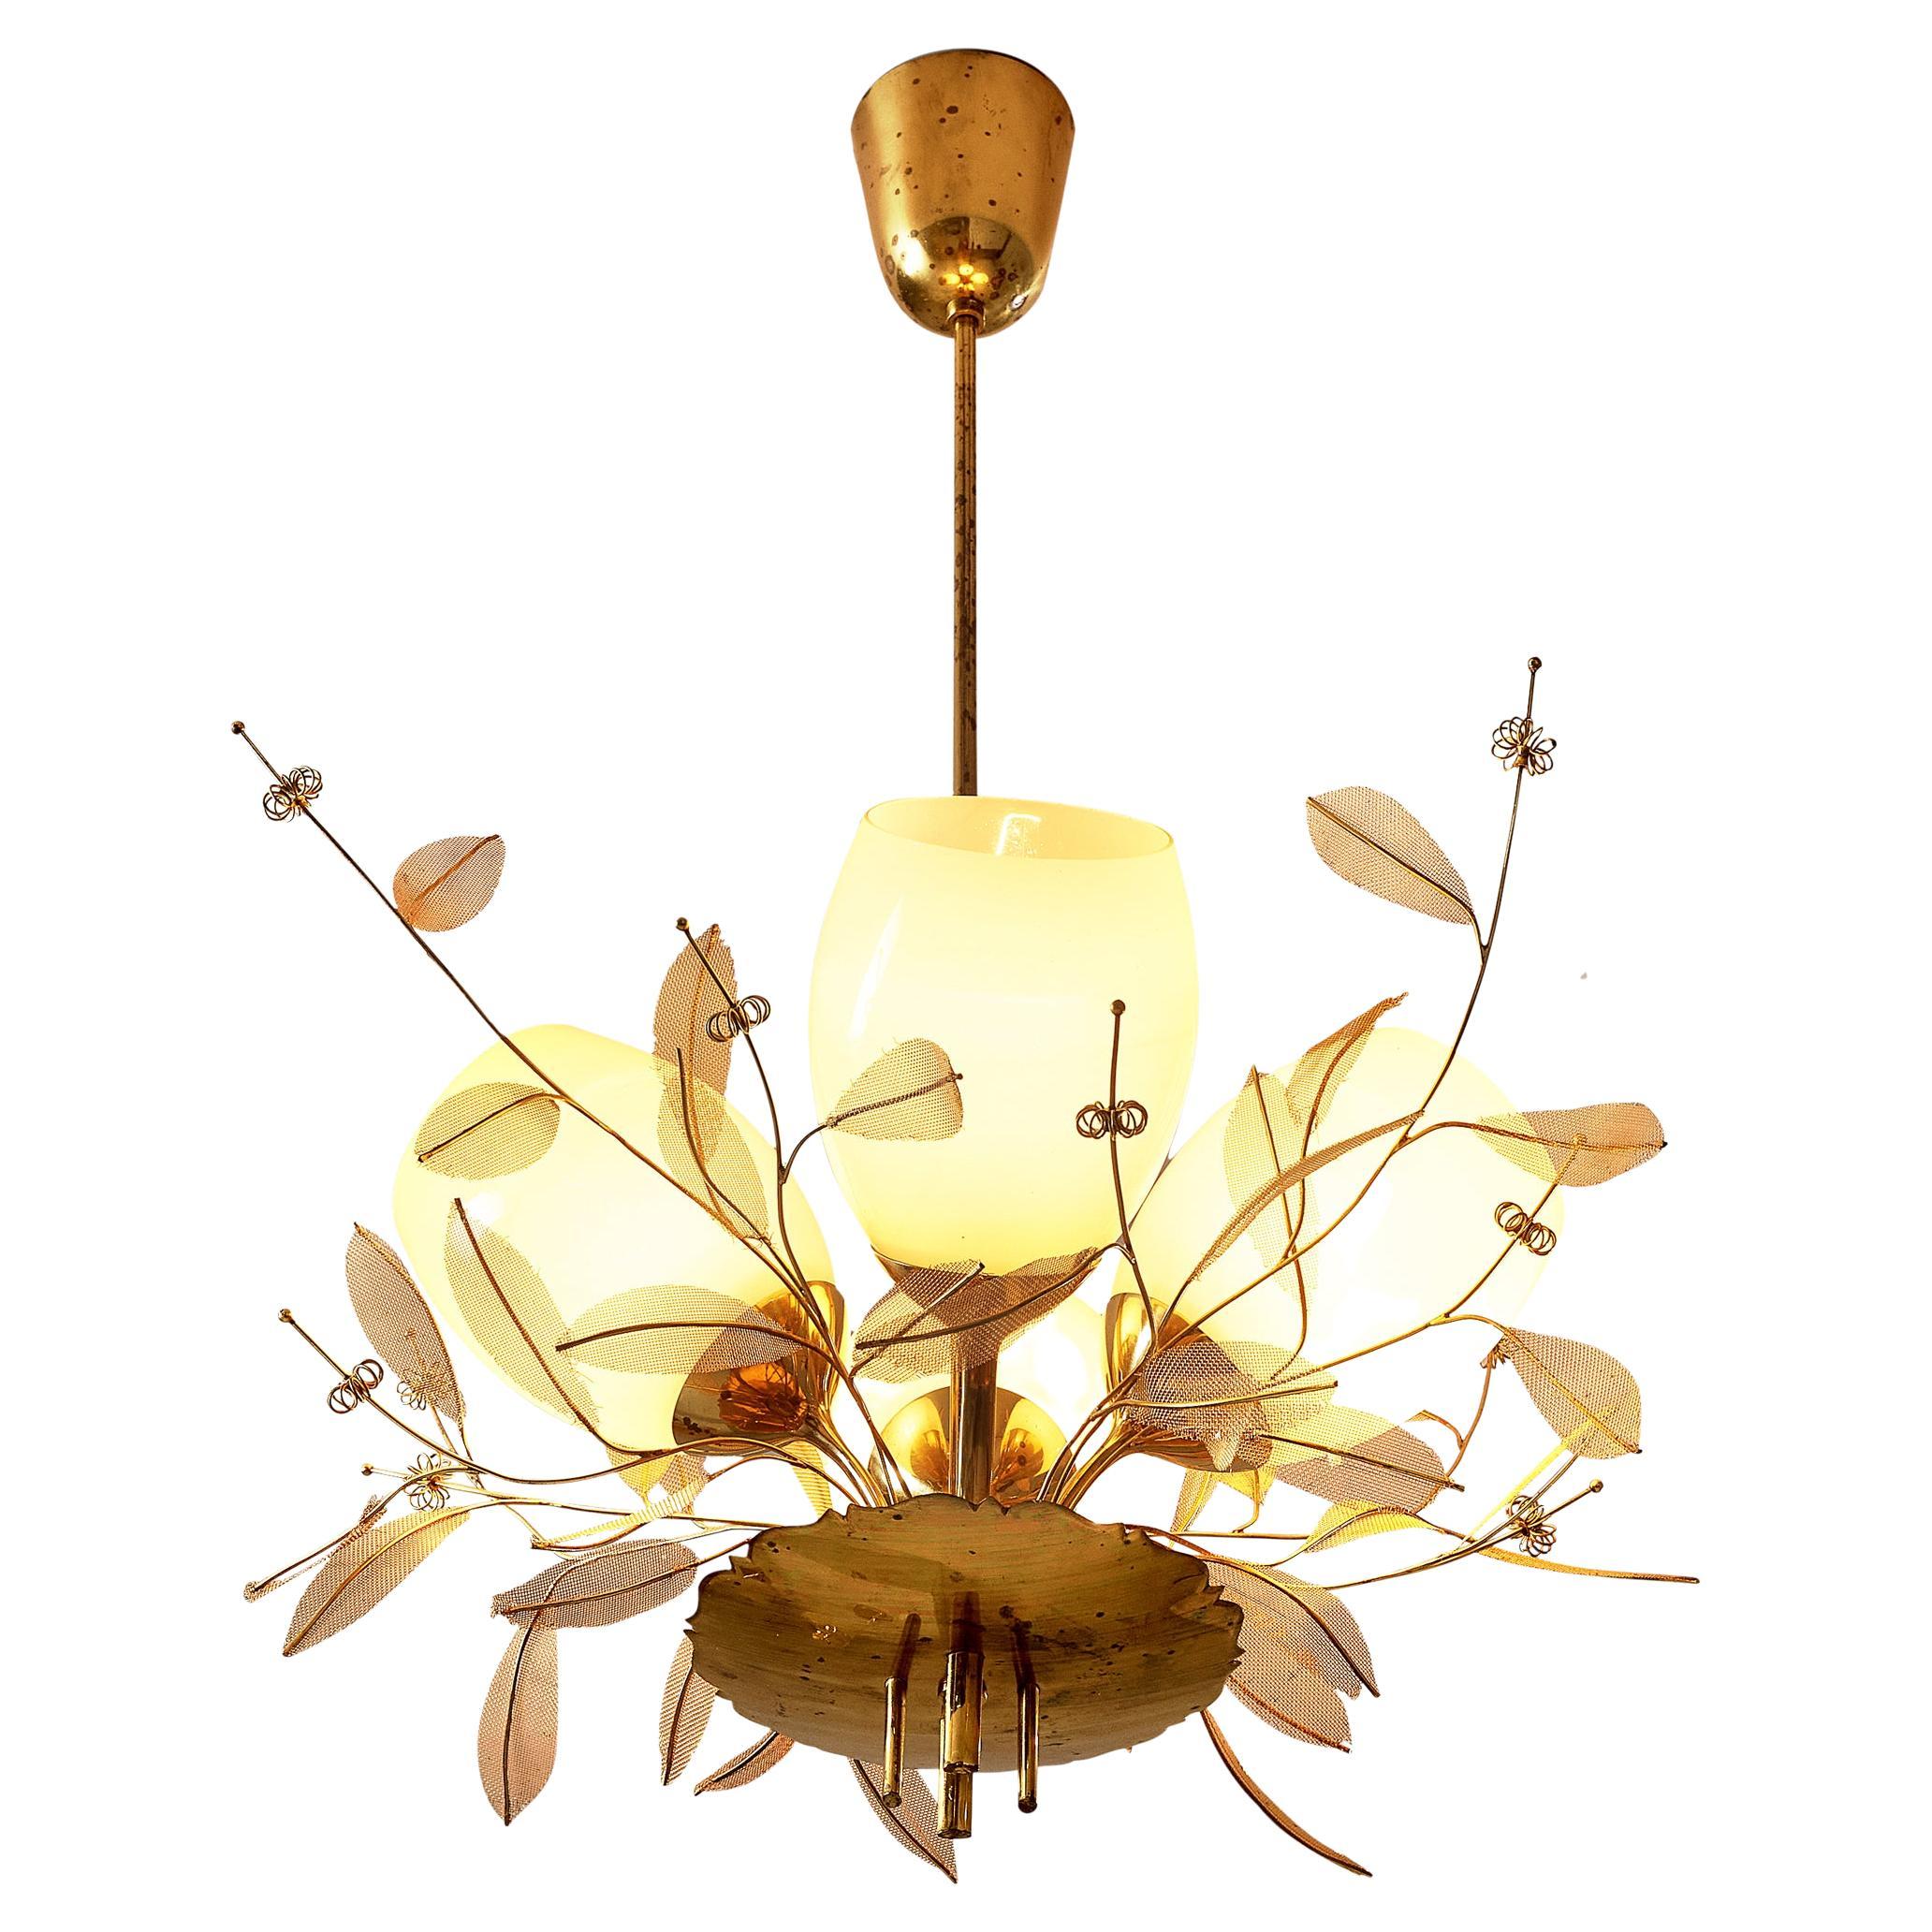 Paavo Tynell for Taito Oy 'Concerto' Chandelier in Brass and Amber Glass